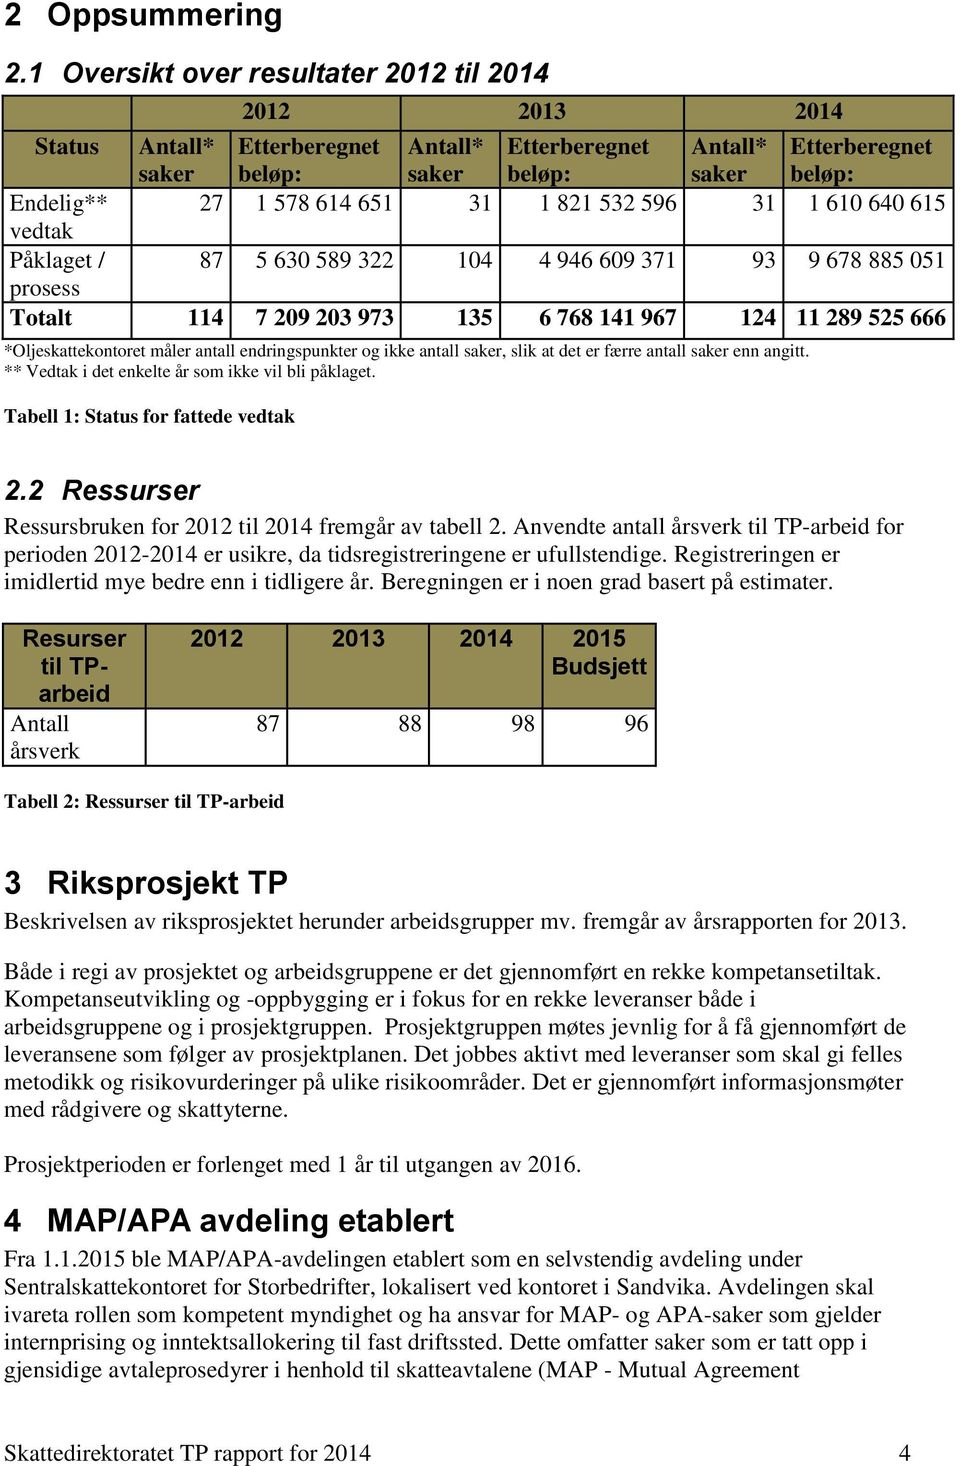 Tabell 1: Status for fattede vedtak 2012 2013 2014 Status Antall* saker Etterberegnet beløp: Antall* saker Etterberegnet beløp: Antall* saker Etterberegnet beløp: Endelig** 27 1 578 614 651 31 1 821